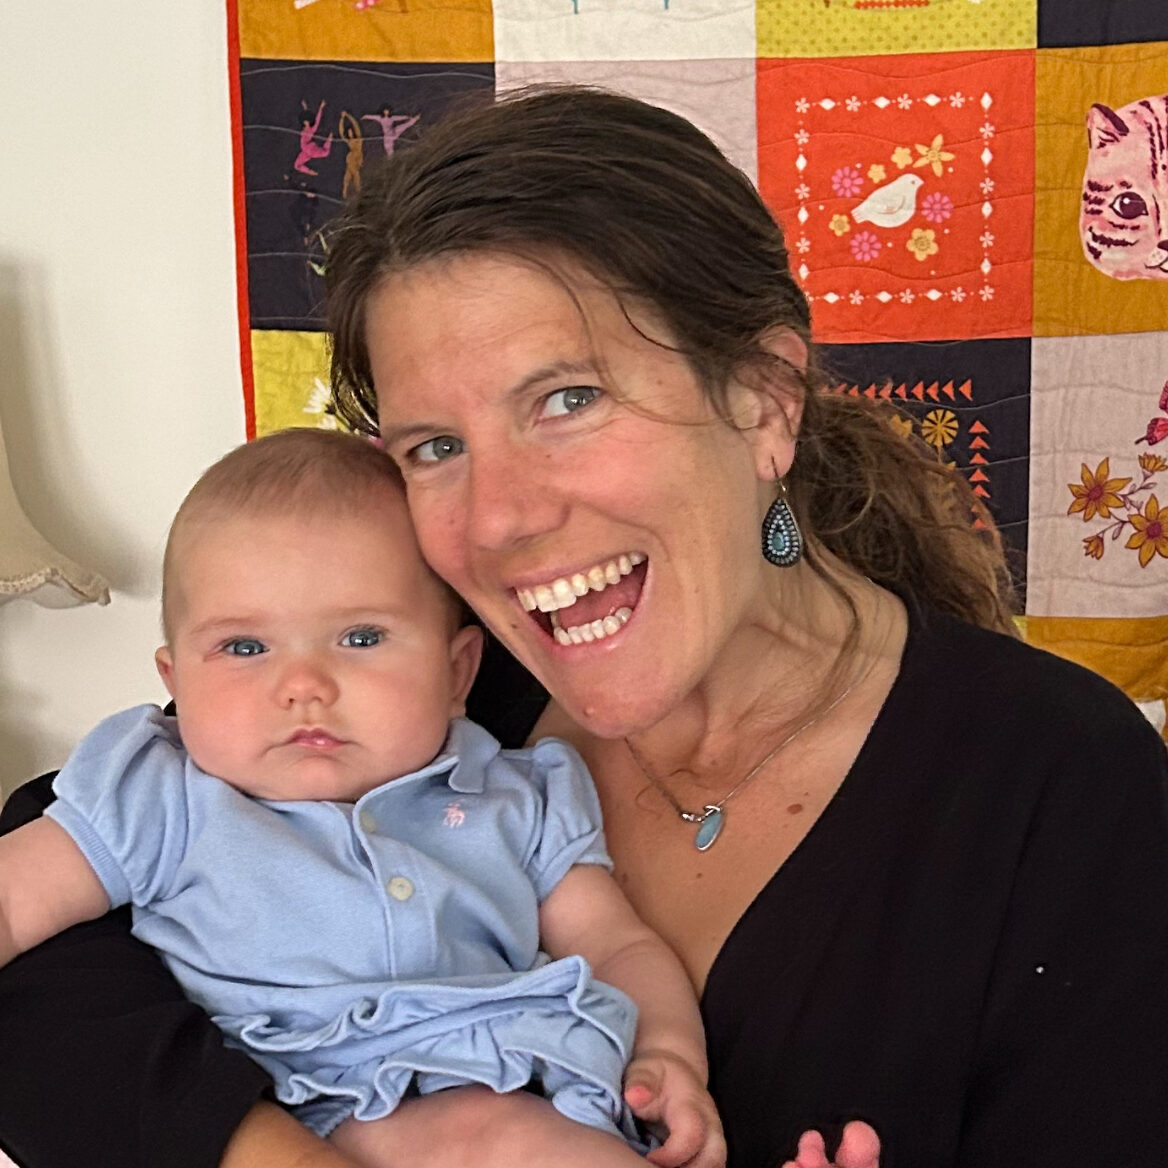 ali louisa starling - fourth trimester podcast - ucsf - PMAD